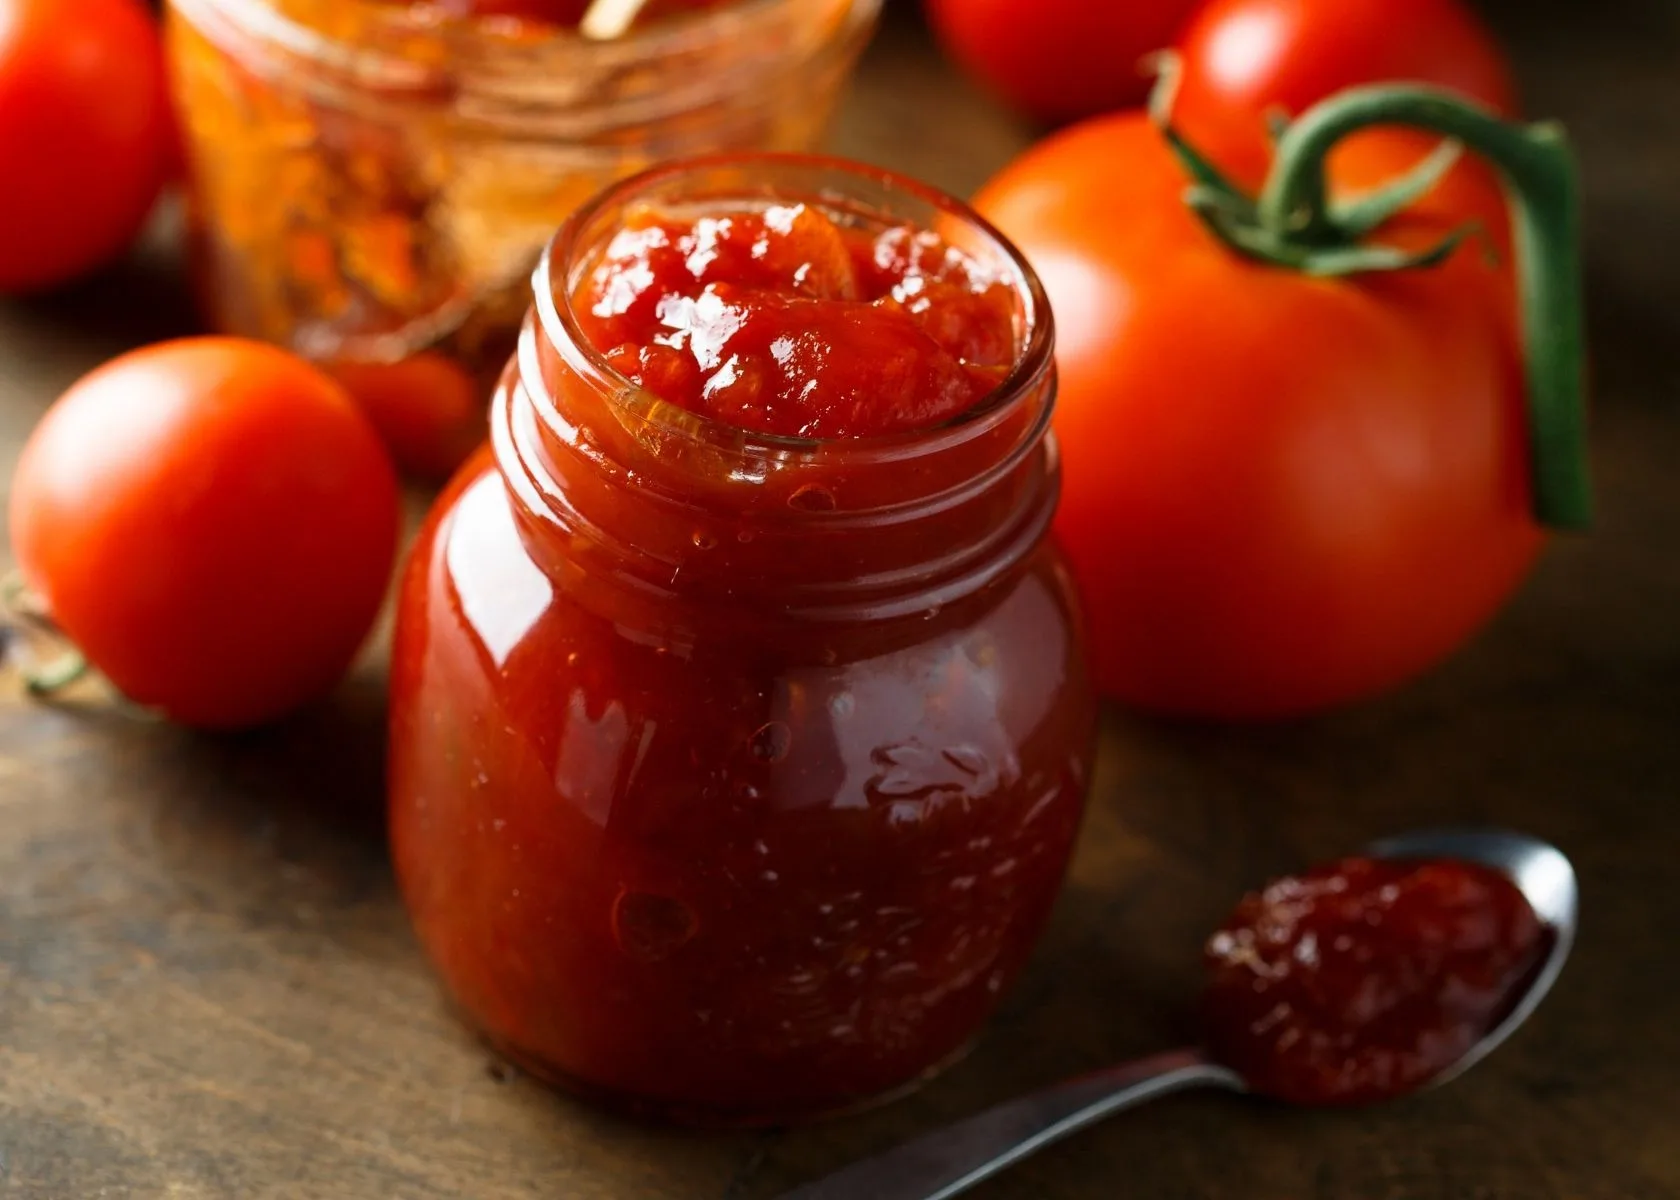 Tomato jam in small clear glass jar surrounded by vine ripened tomatoes.